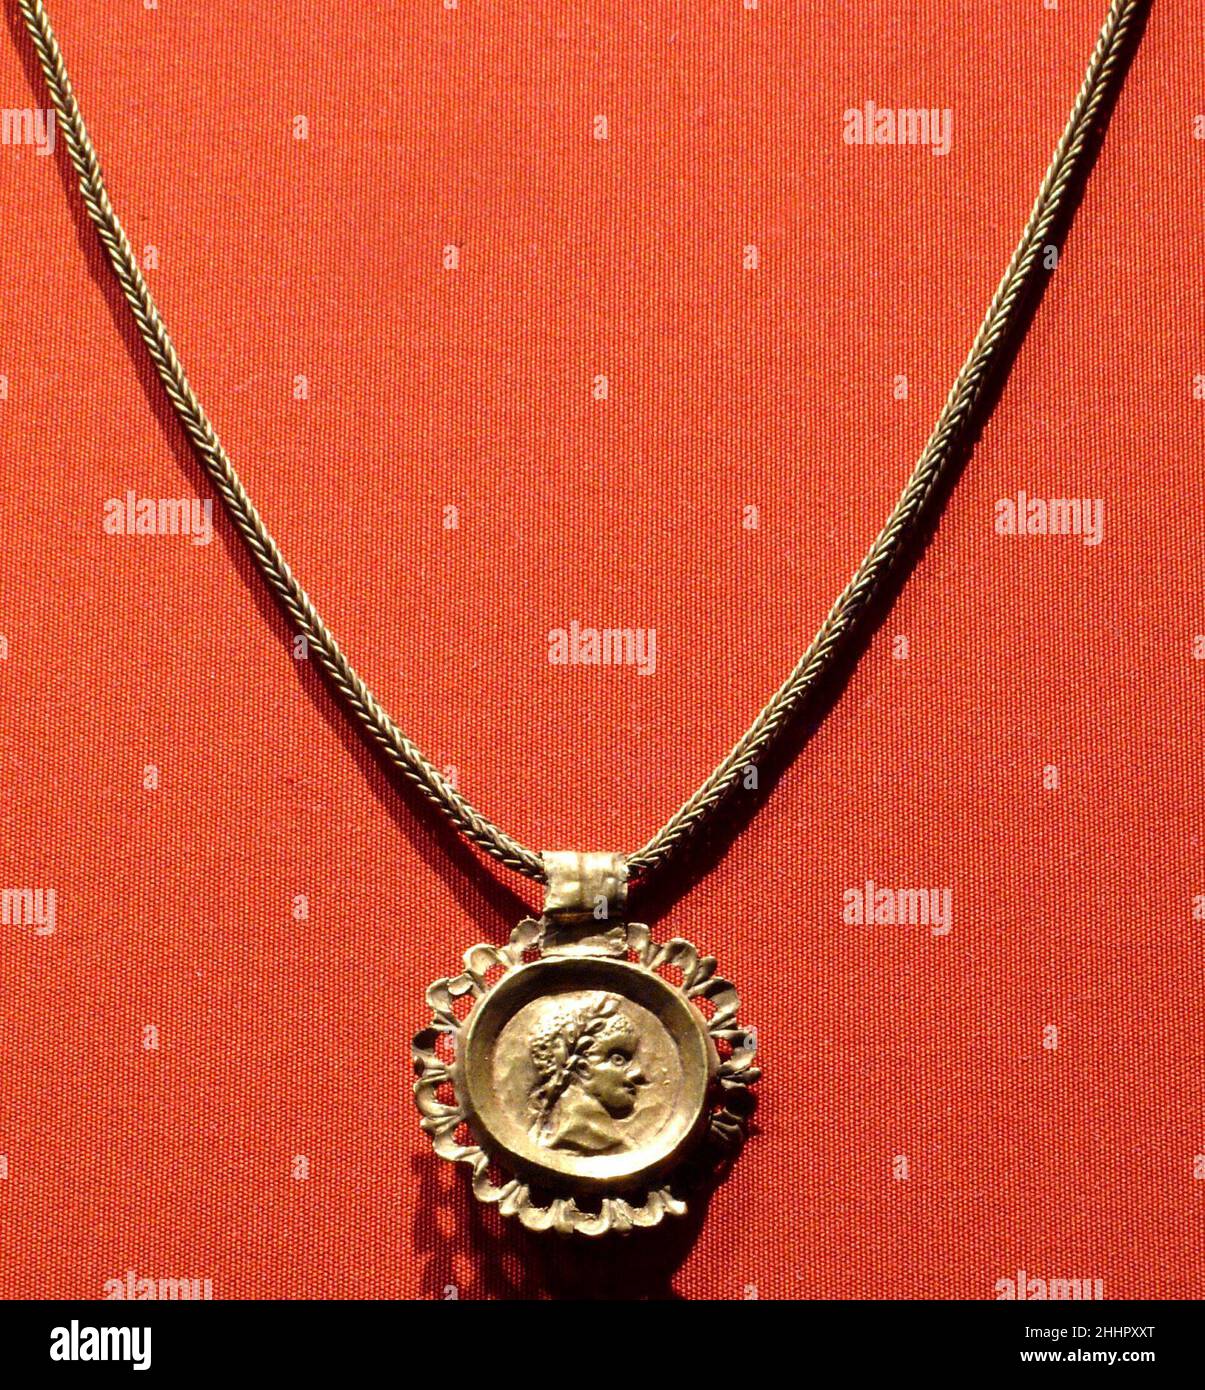 Chain with a pendant bearing an emperor's profile in an openwork frame A.D. 3rd century Roman Period The medallion here imitates a coin portrait of an emperor, and probably dates to roughly the mid third century when the latter began sometimes to be incorporated in jewelry. It has been noted that the sheet gold pendant is so flimsy that it might not have originally hung on this particular chain, which is, by contrast, rathe sturdy.. Chain with a pendant bearing an emperor's profile in an openwork frame  547921 Stock Photo